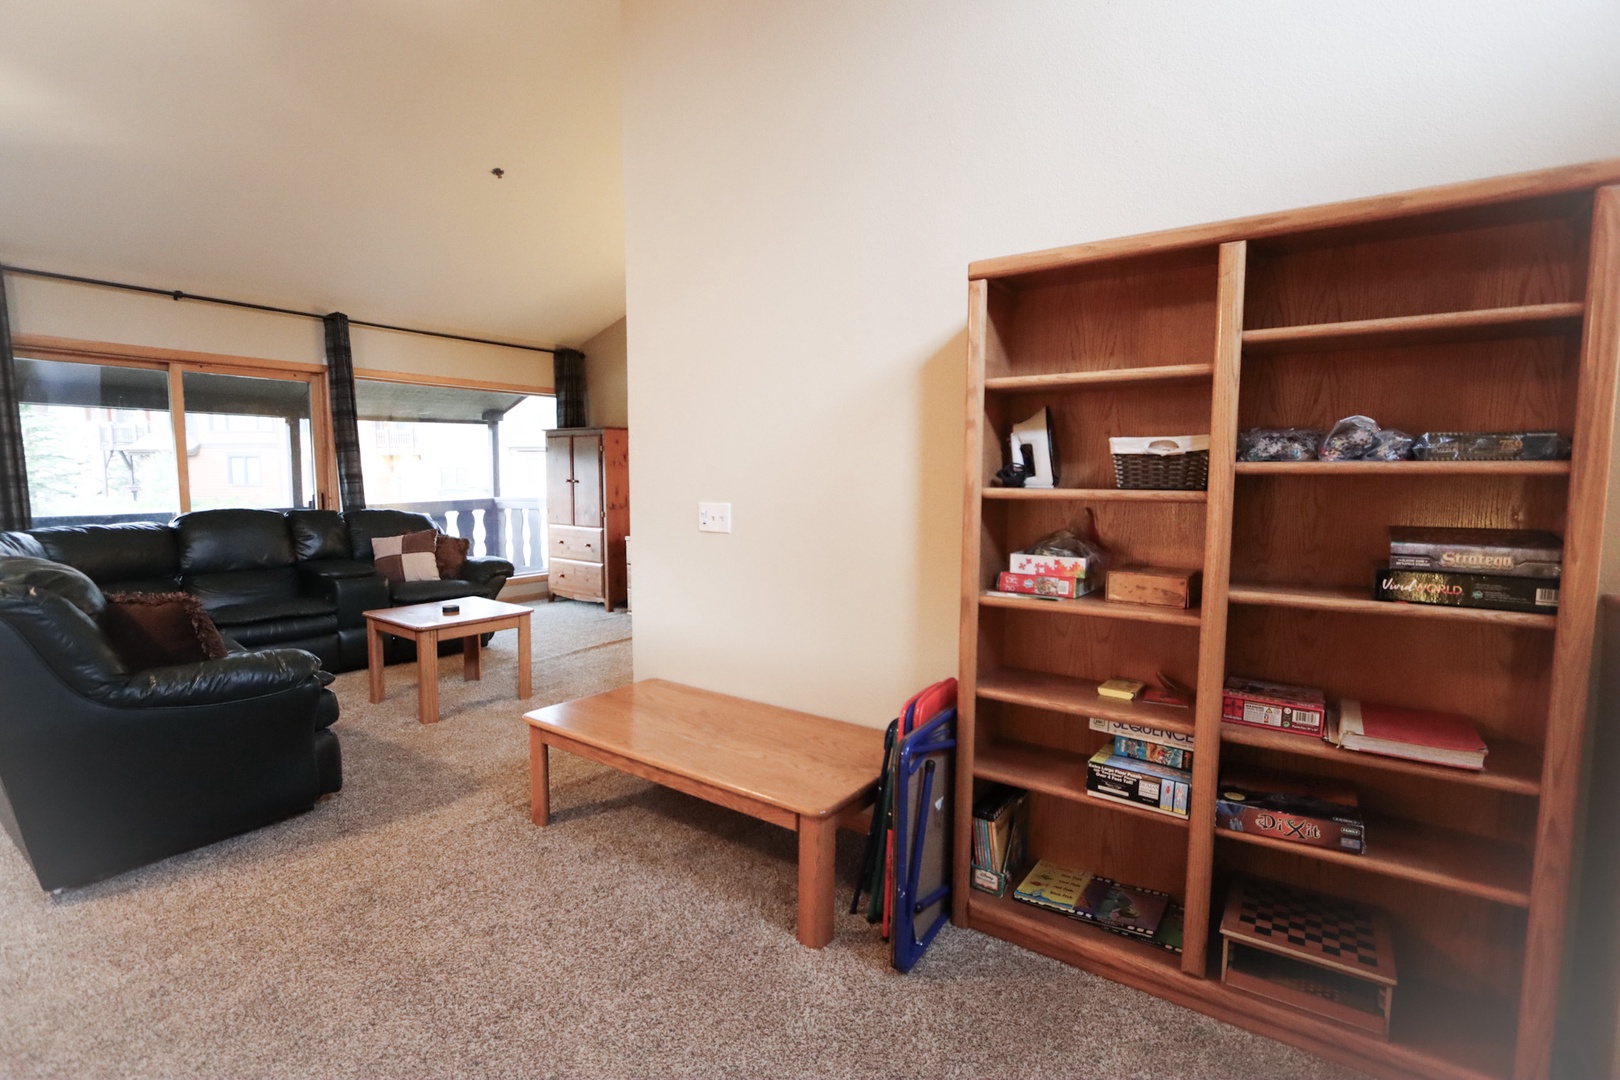 Lounge or unleash your competitive side with board games in the large loft